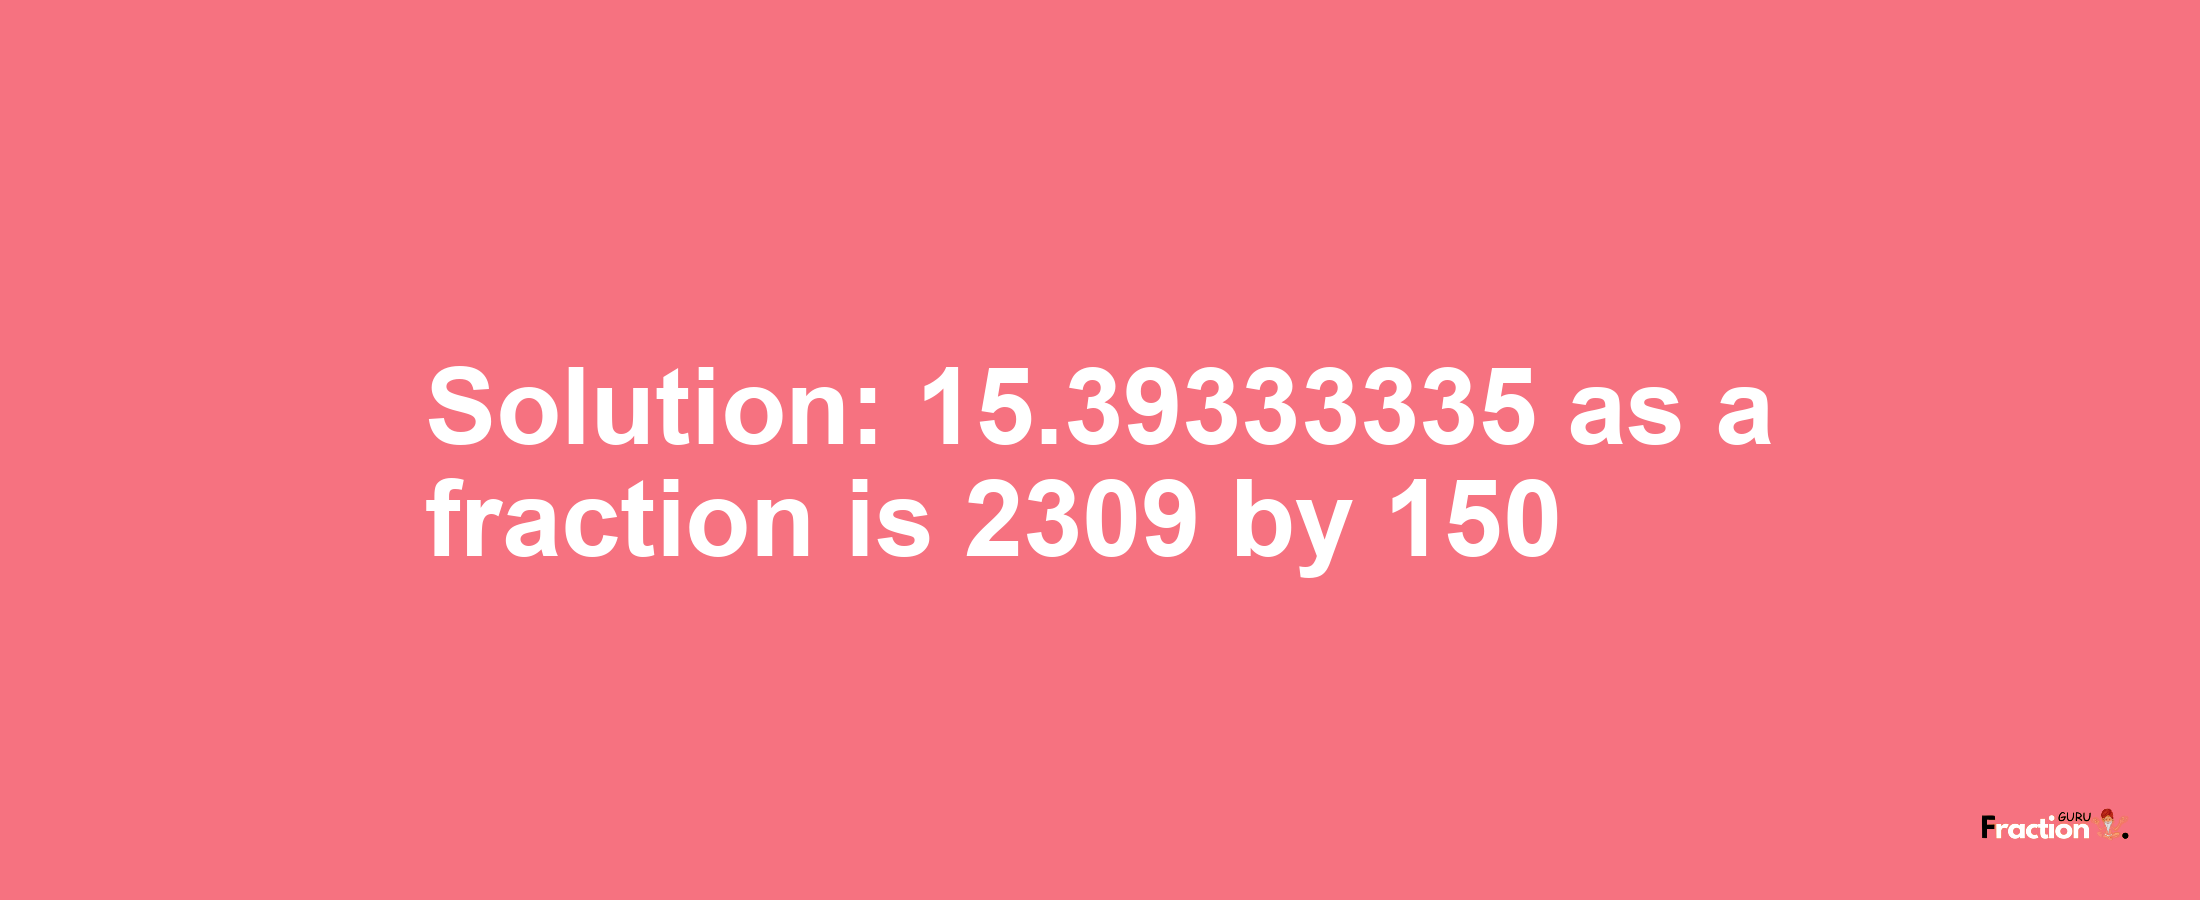 Solution:15.39333335 as a fraction is 2309/150